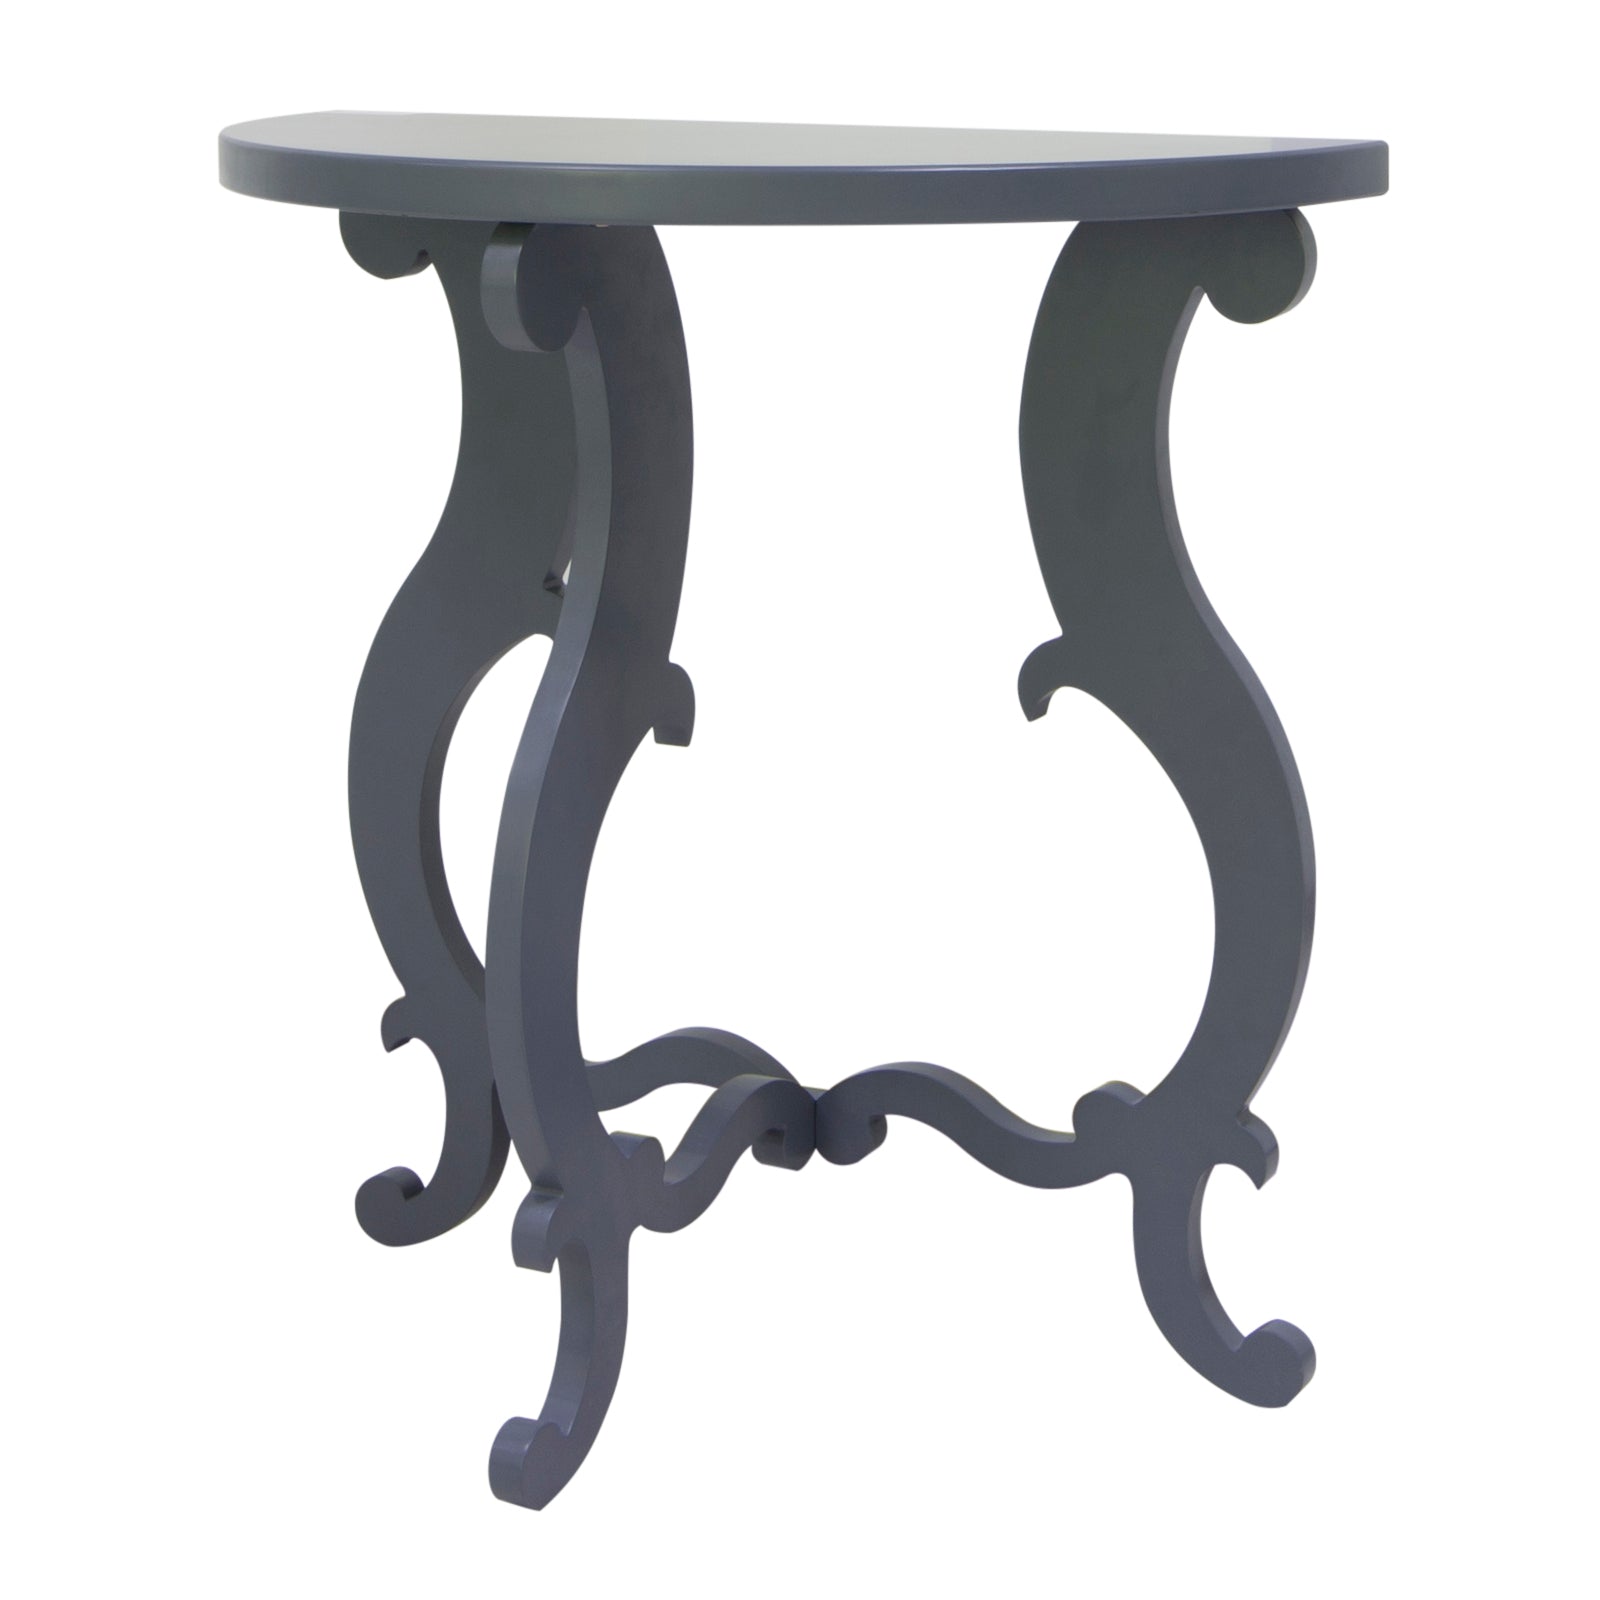 Crestview Collection Harbor Town 32" x 16" x 32" Transitional Acacia Wood Carved Leg Demilune In Prussian Blue Finish